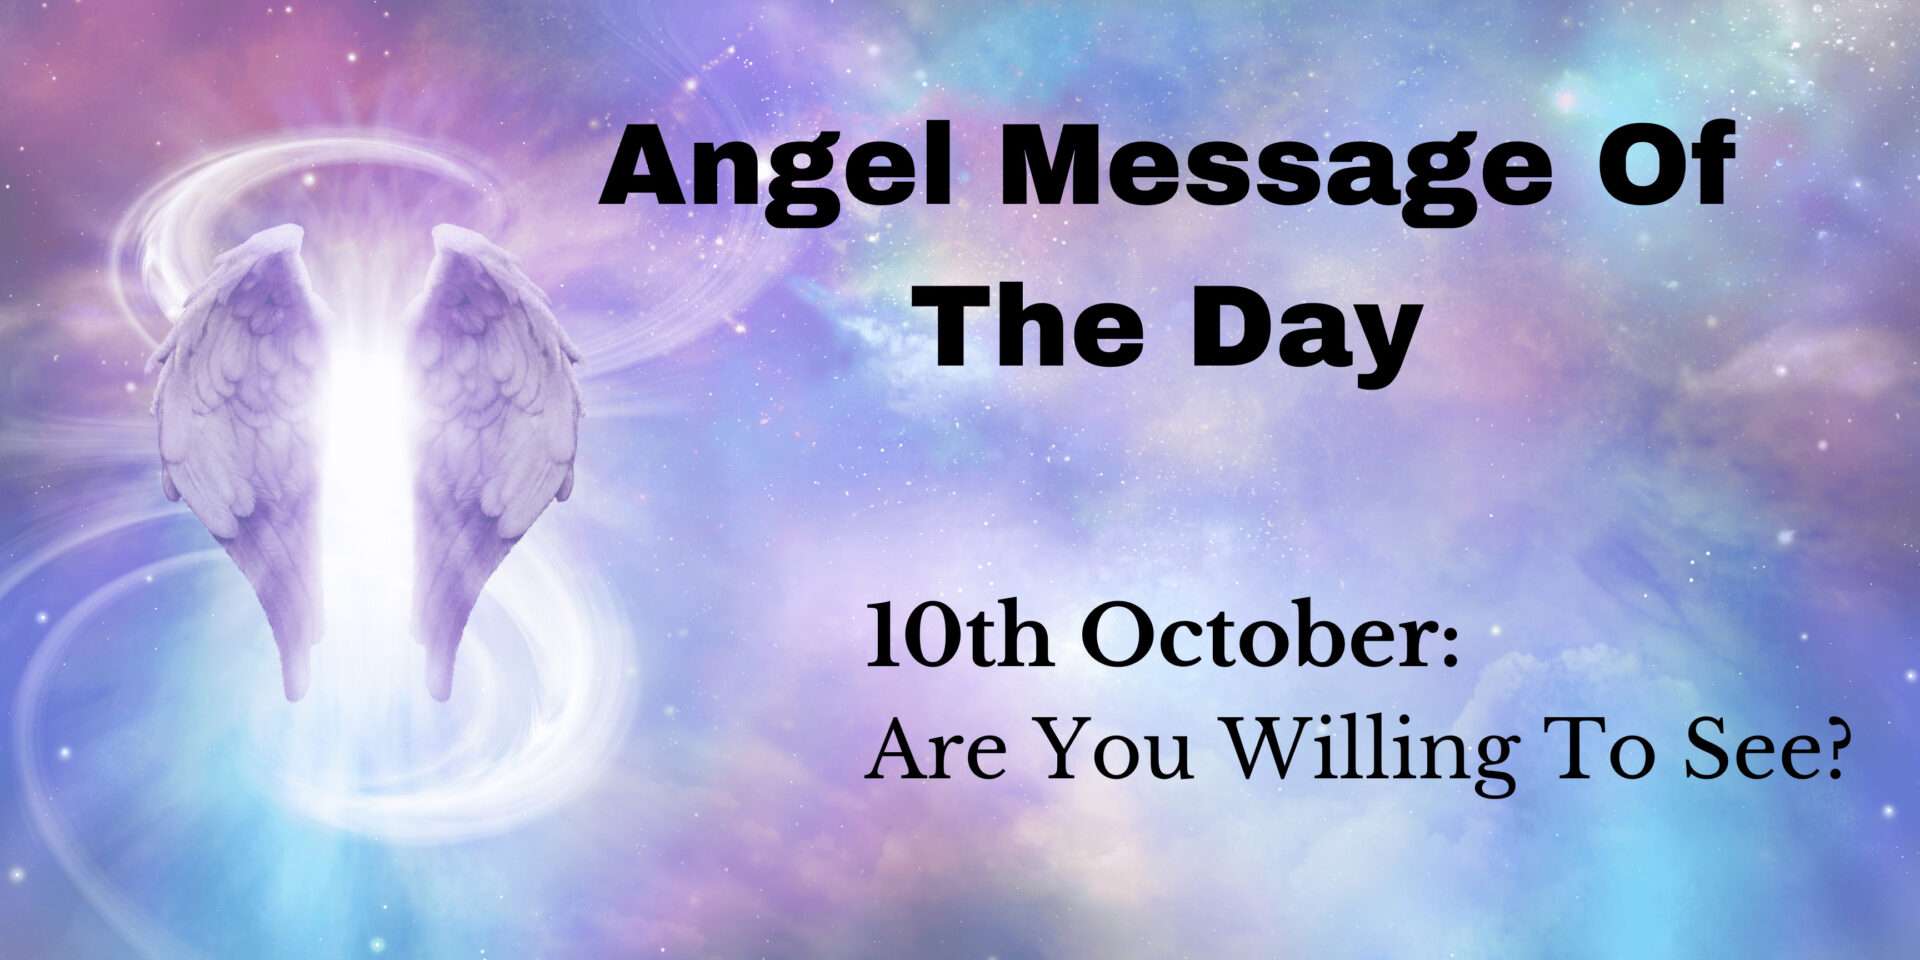 angel message of the day : are you willing to see?